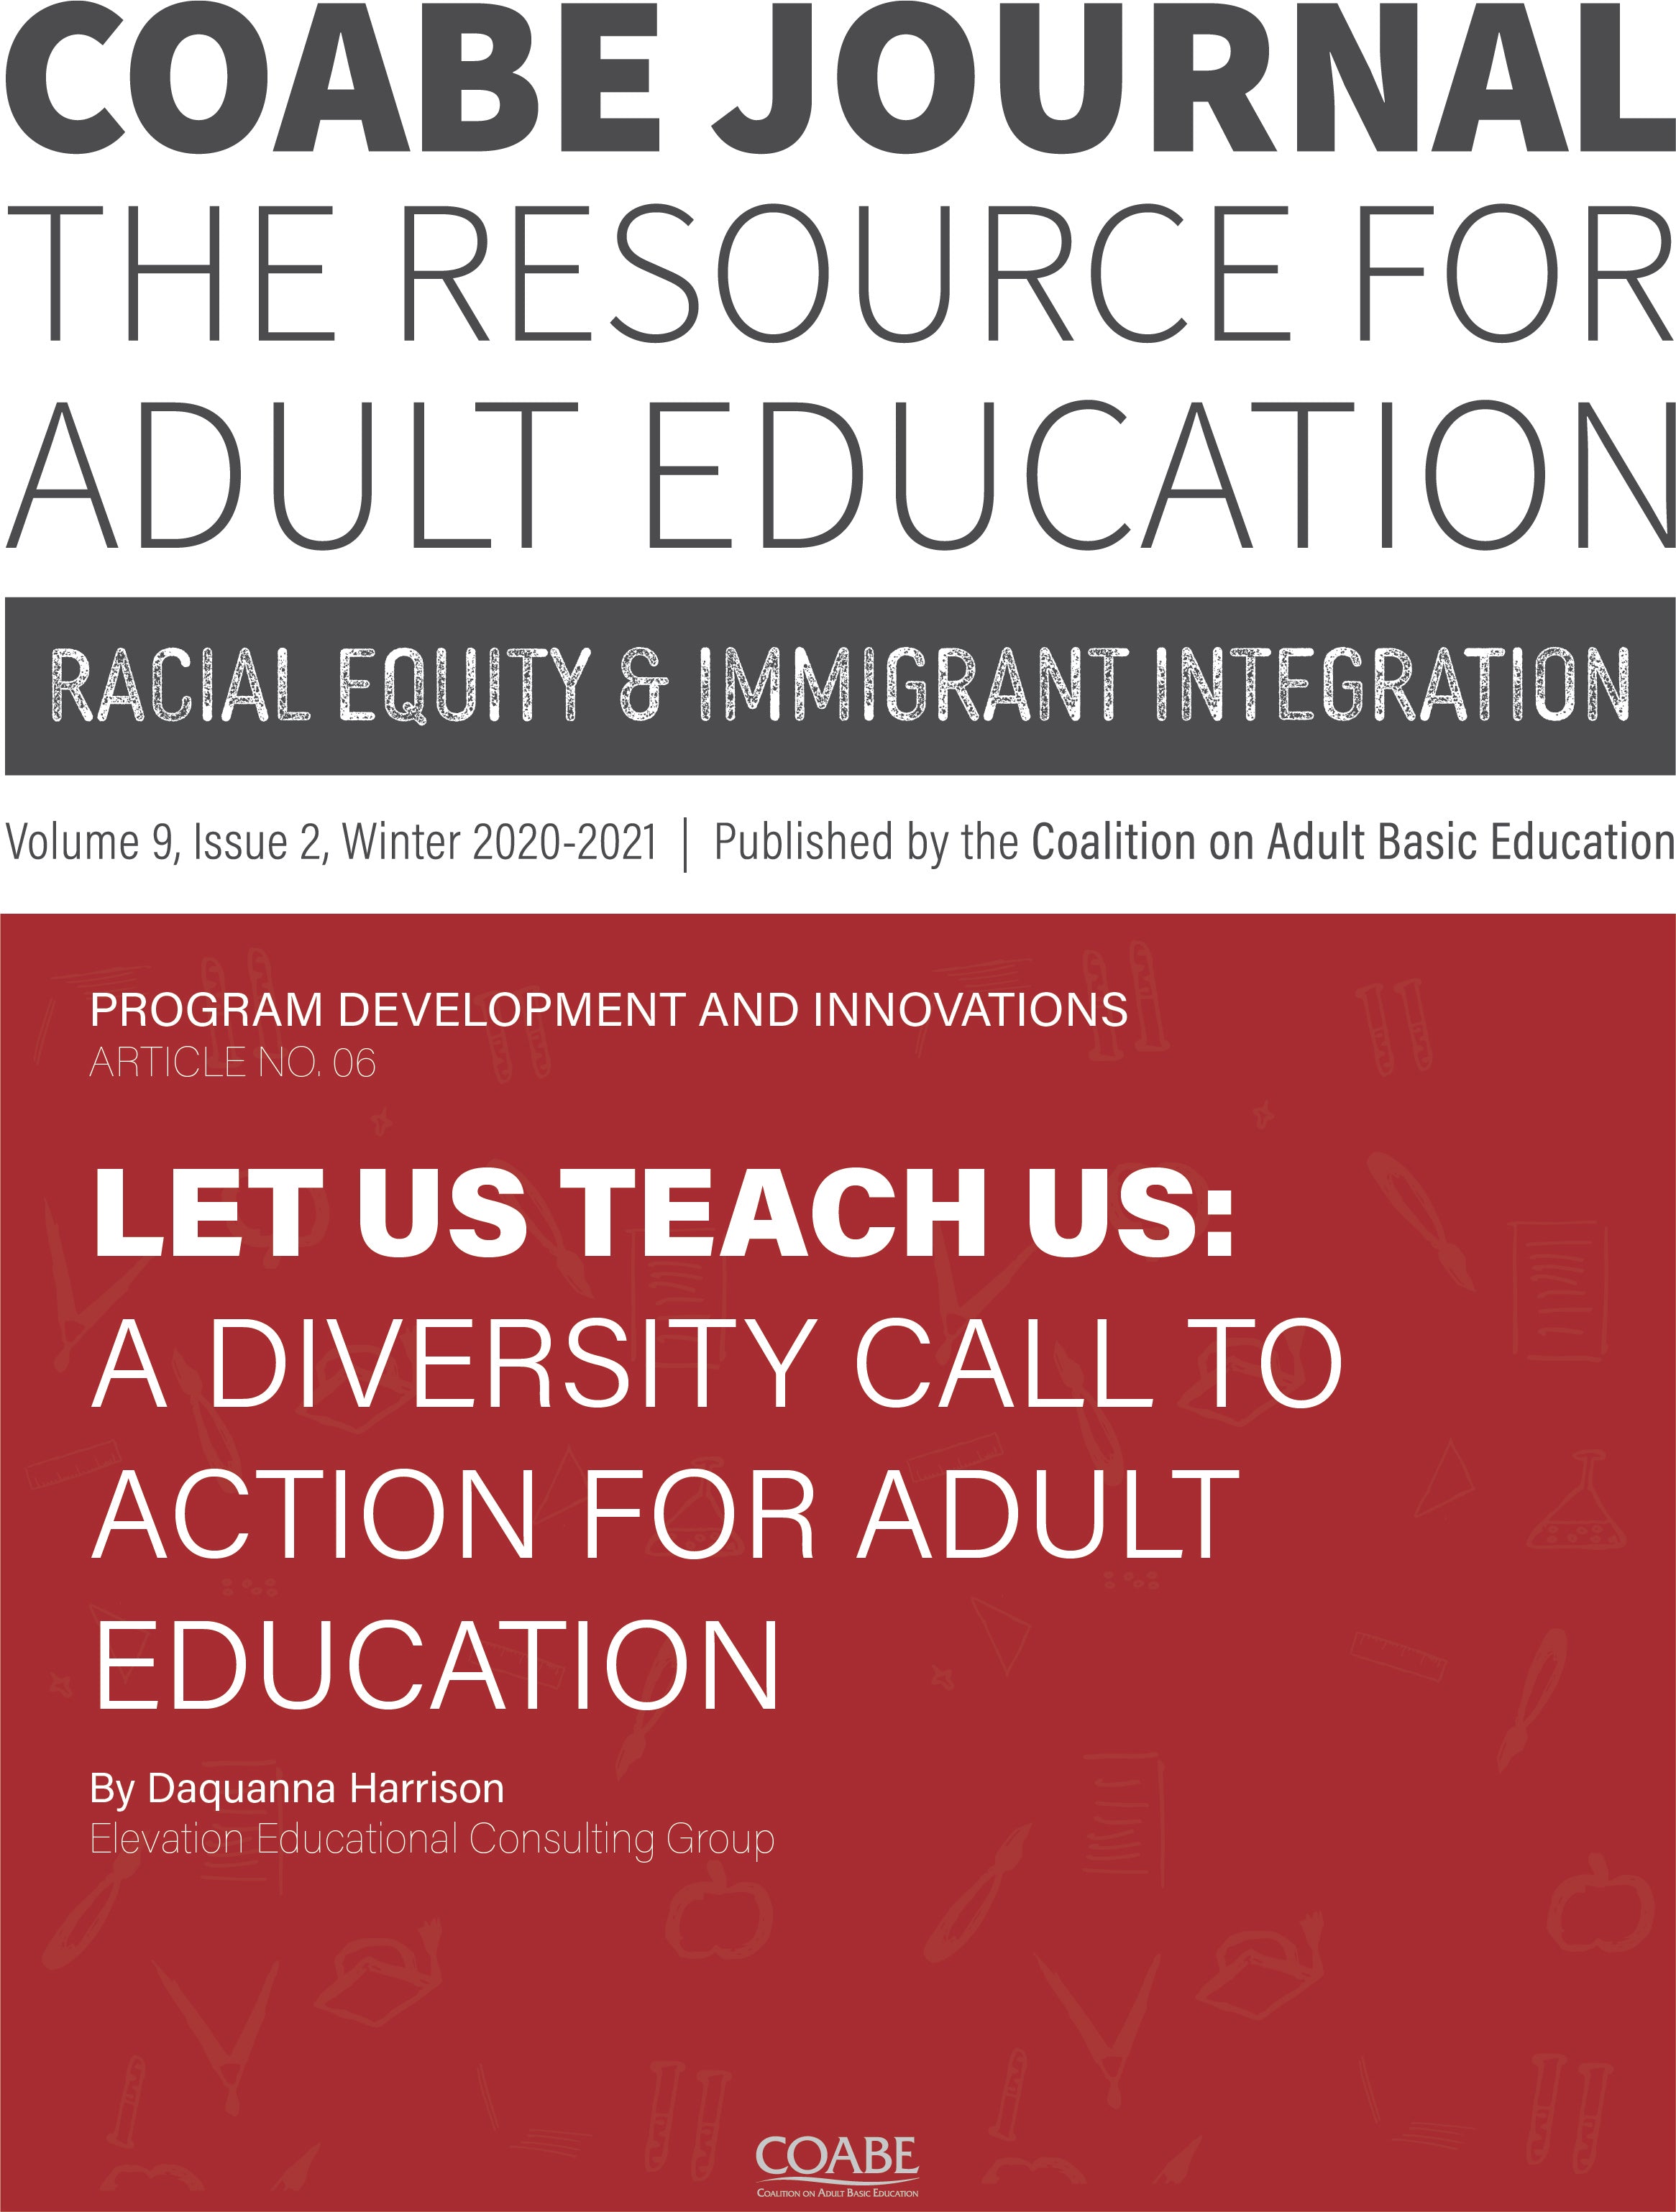 Article 06 / Let Us Teach Us: A Diversity Call to Action for Adult Education